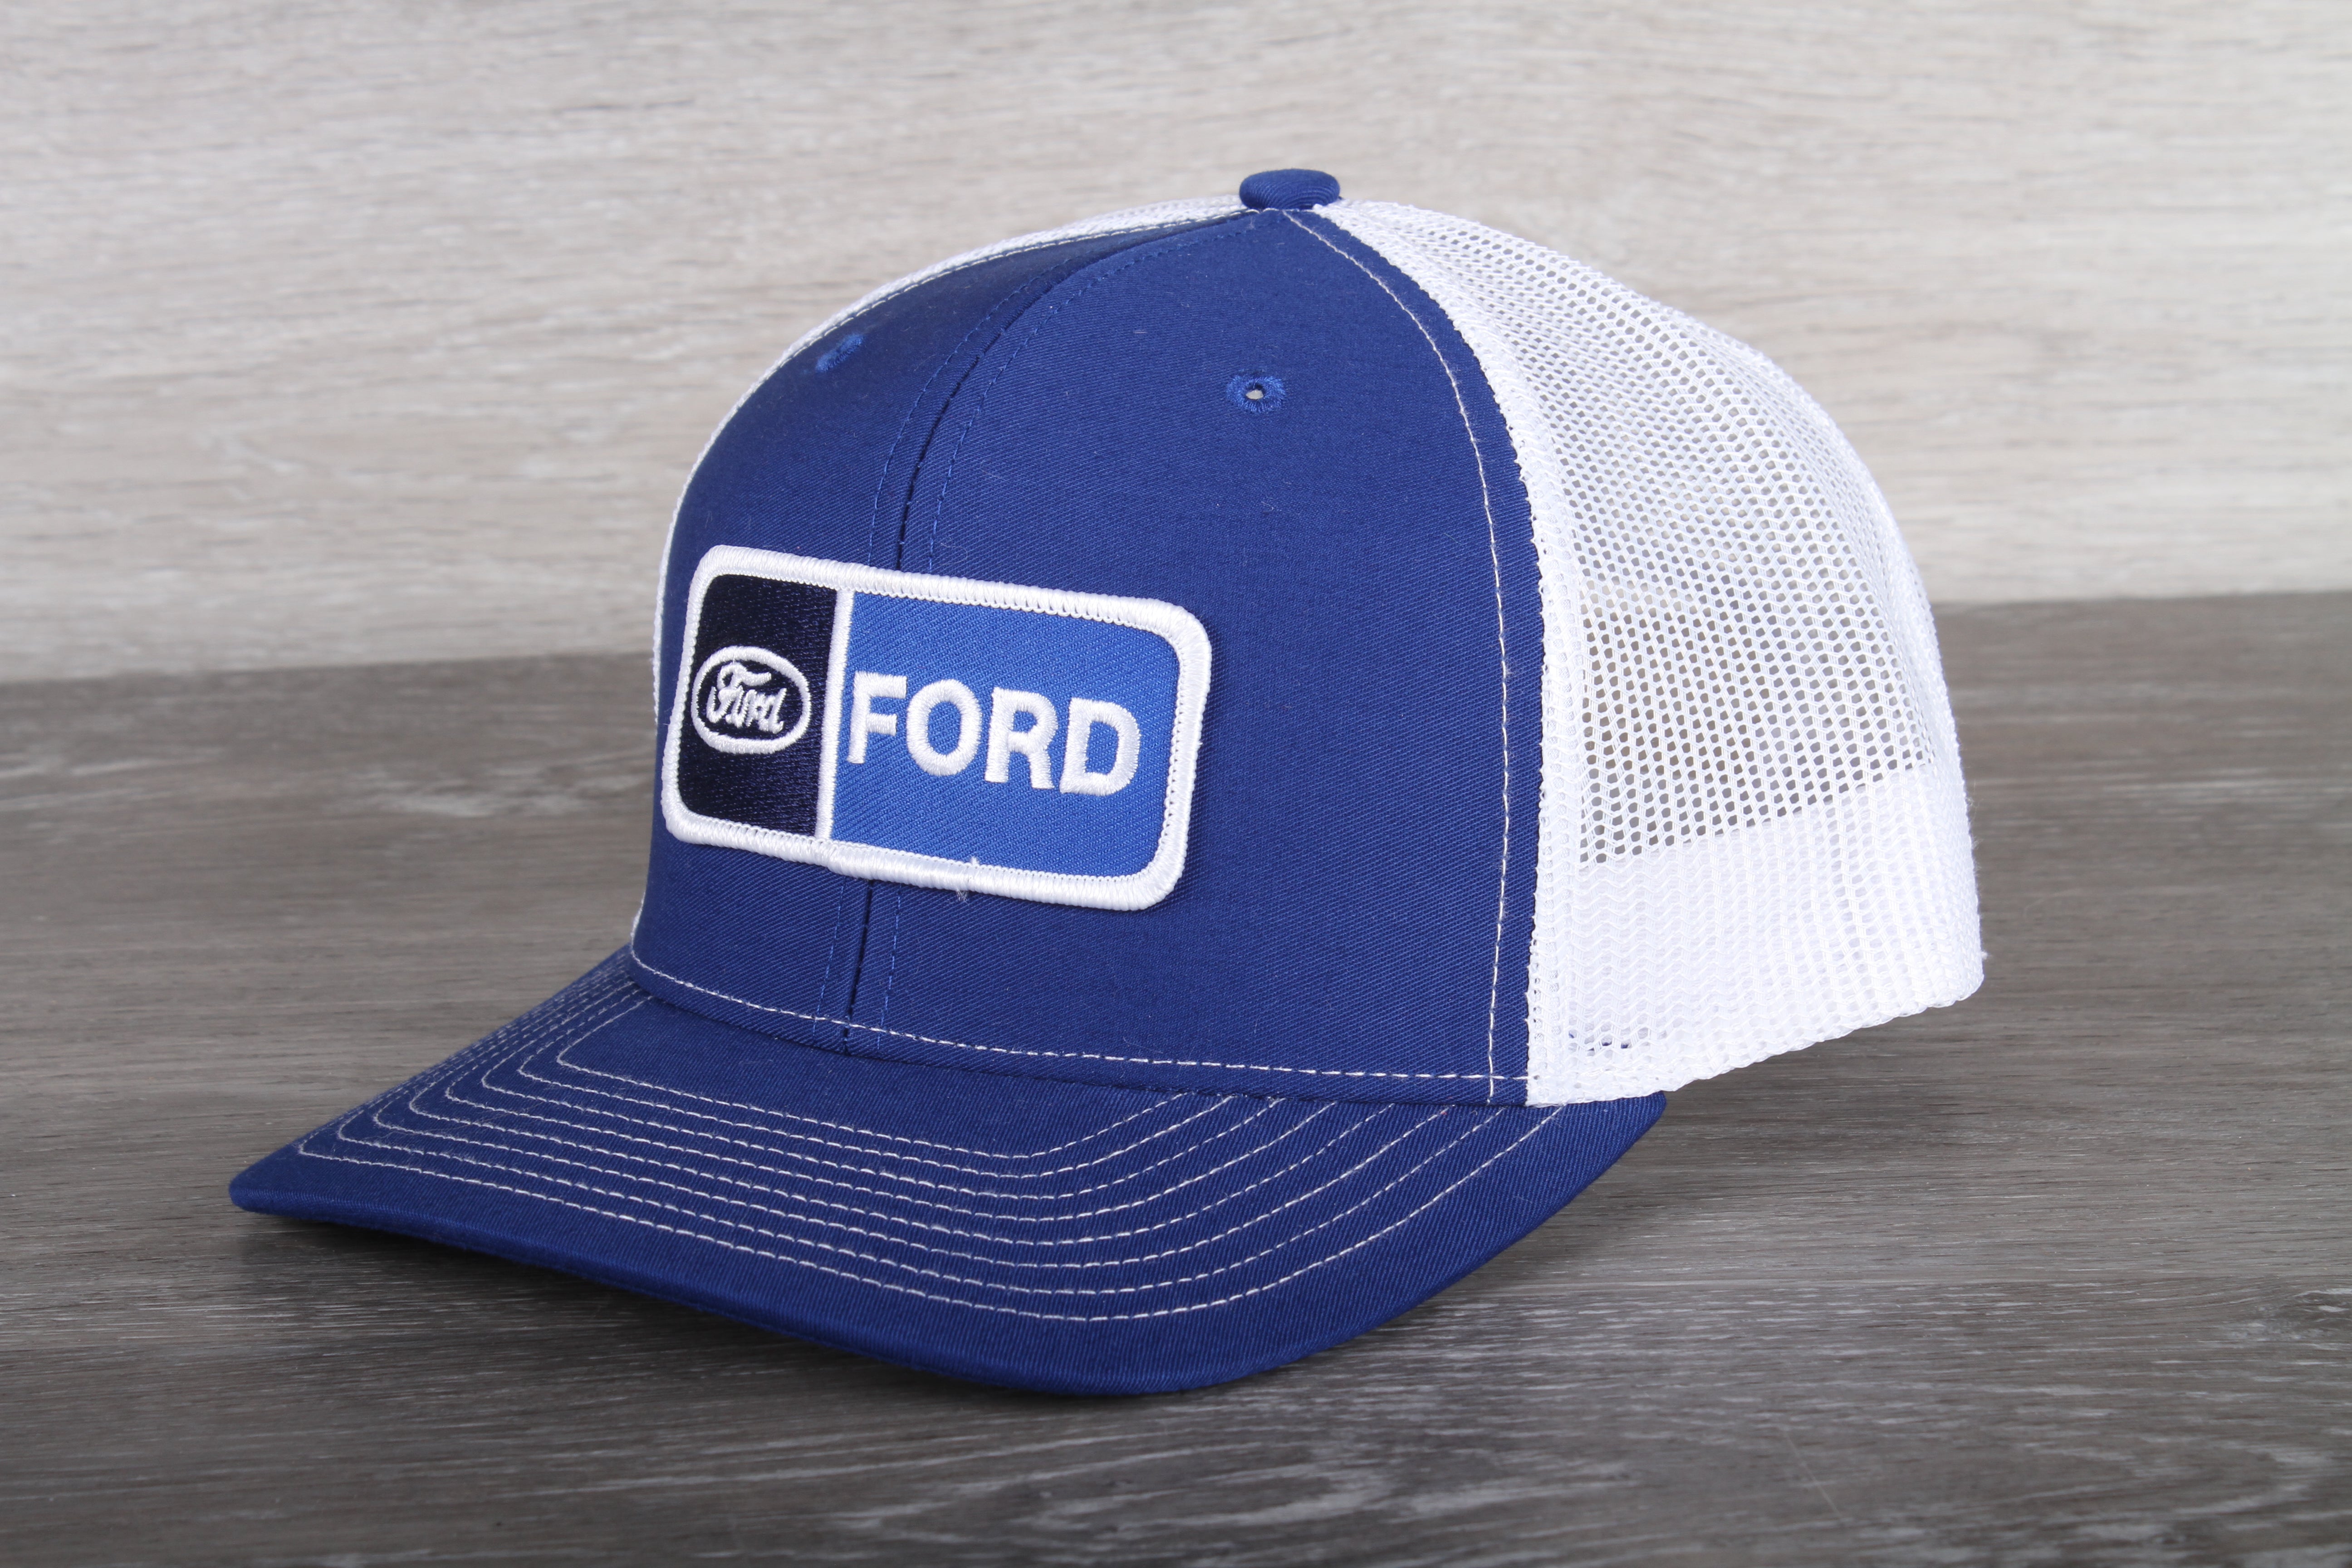 Vintage Ford patch on a Richardson 112 trucker hat